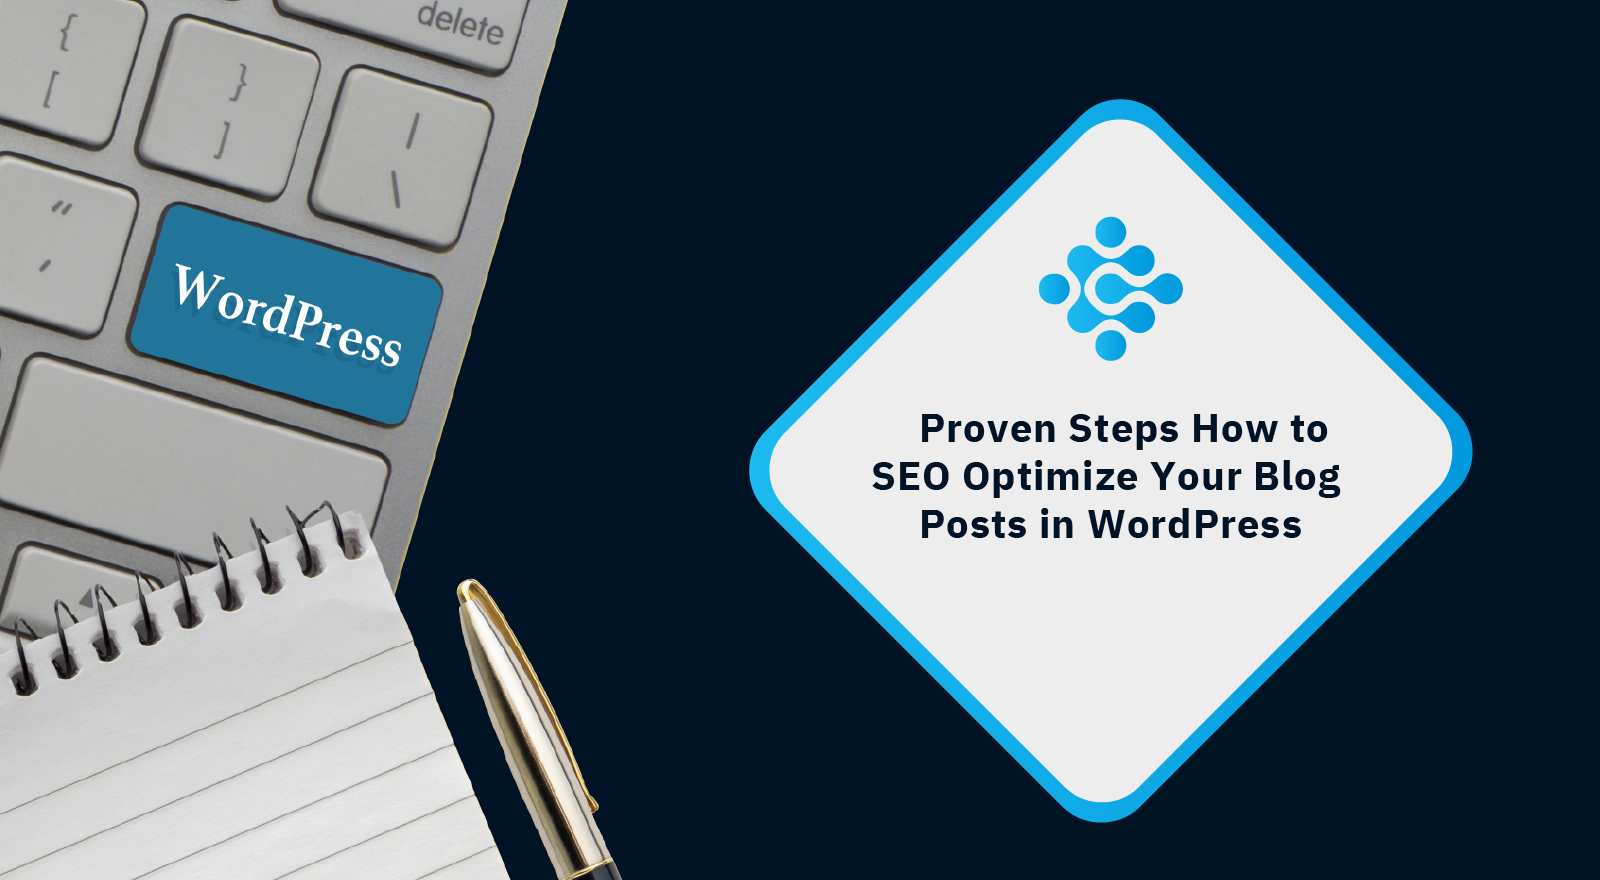 Proven-Steps-How-to-SEO-Optimize-Your-BlogPosts-in-WordPress (1)